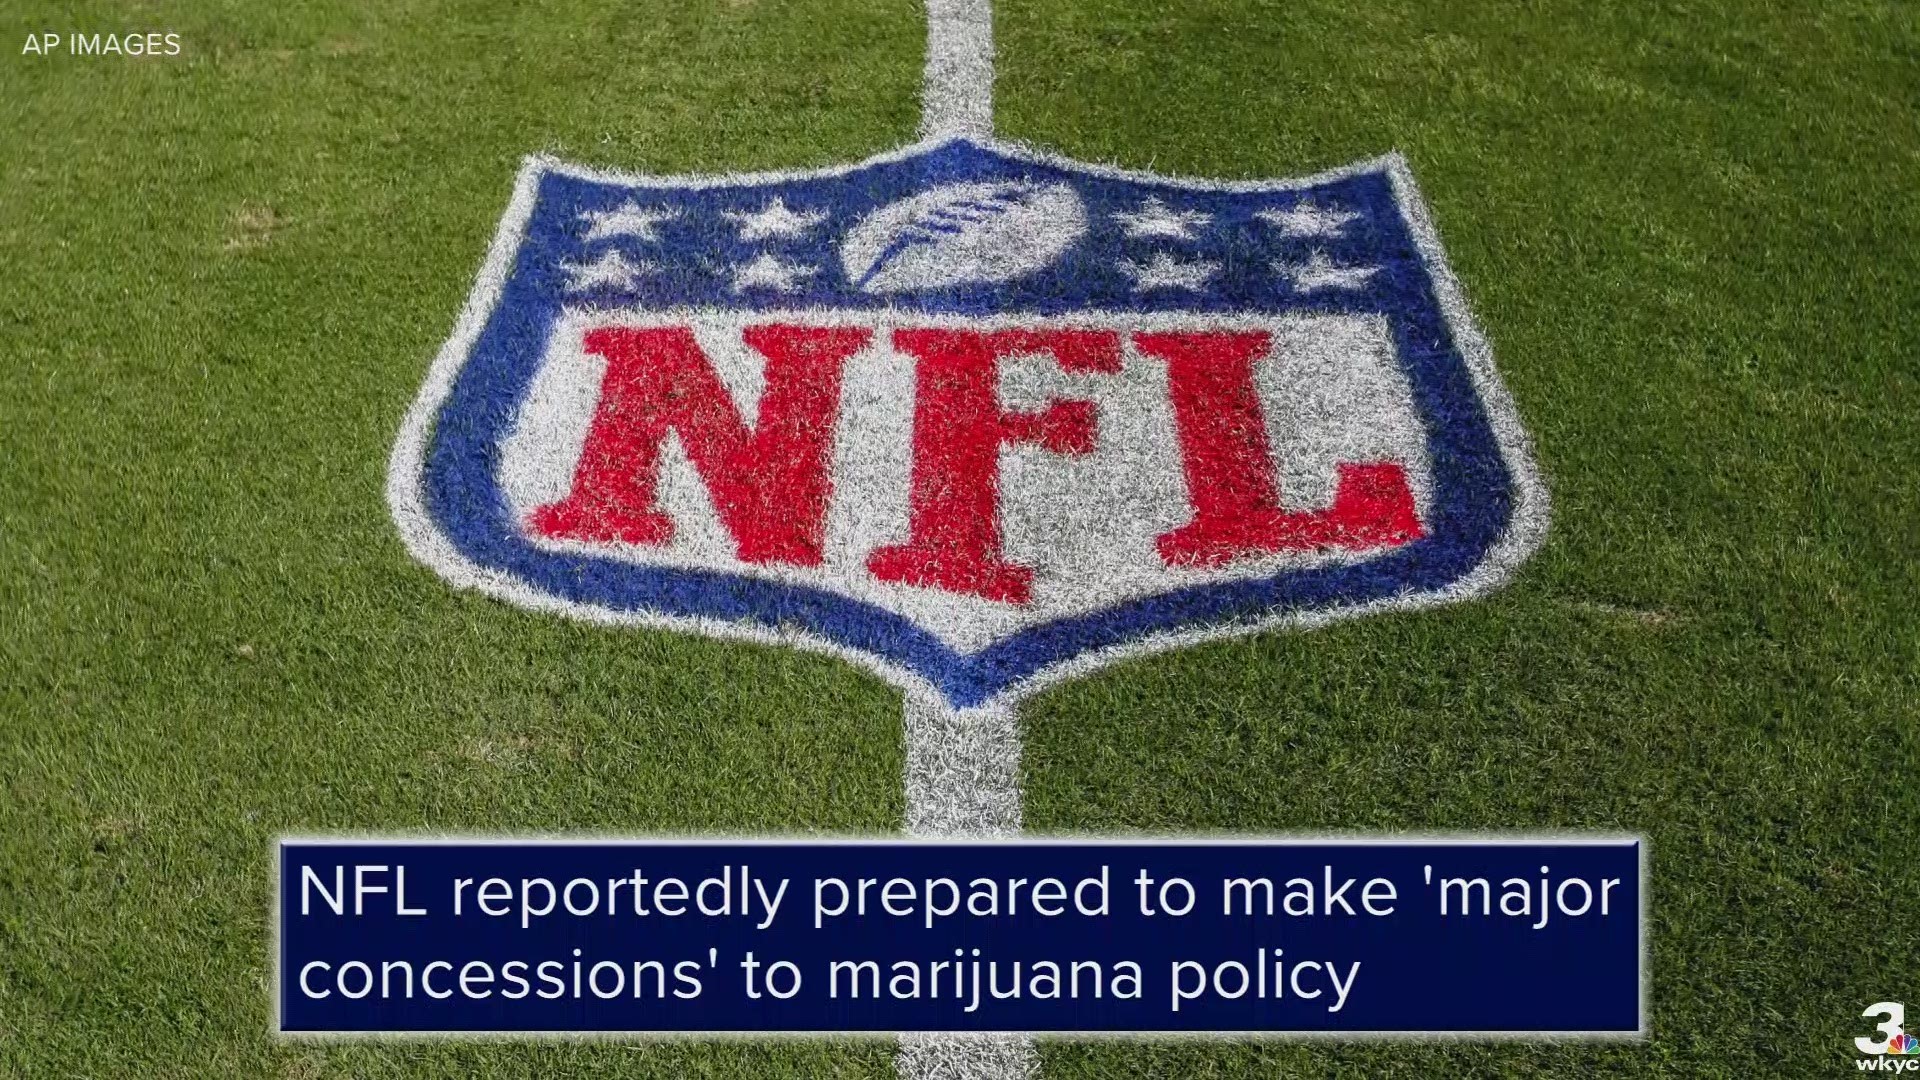 According to Pro Football Talk, the NFL is prepared to adopt a more lenient substance abuse policy in its next collective bargaining agreement, especially as it relates to marijuana.